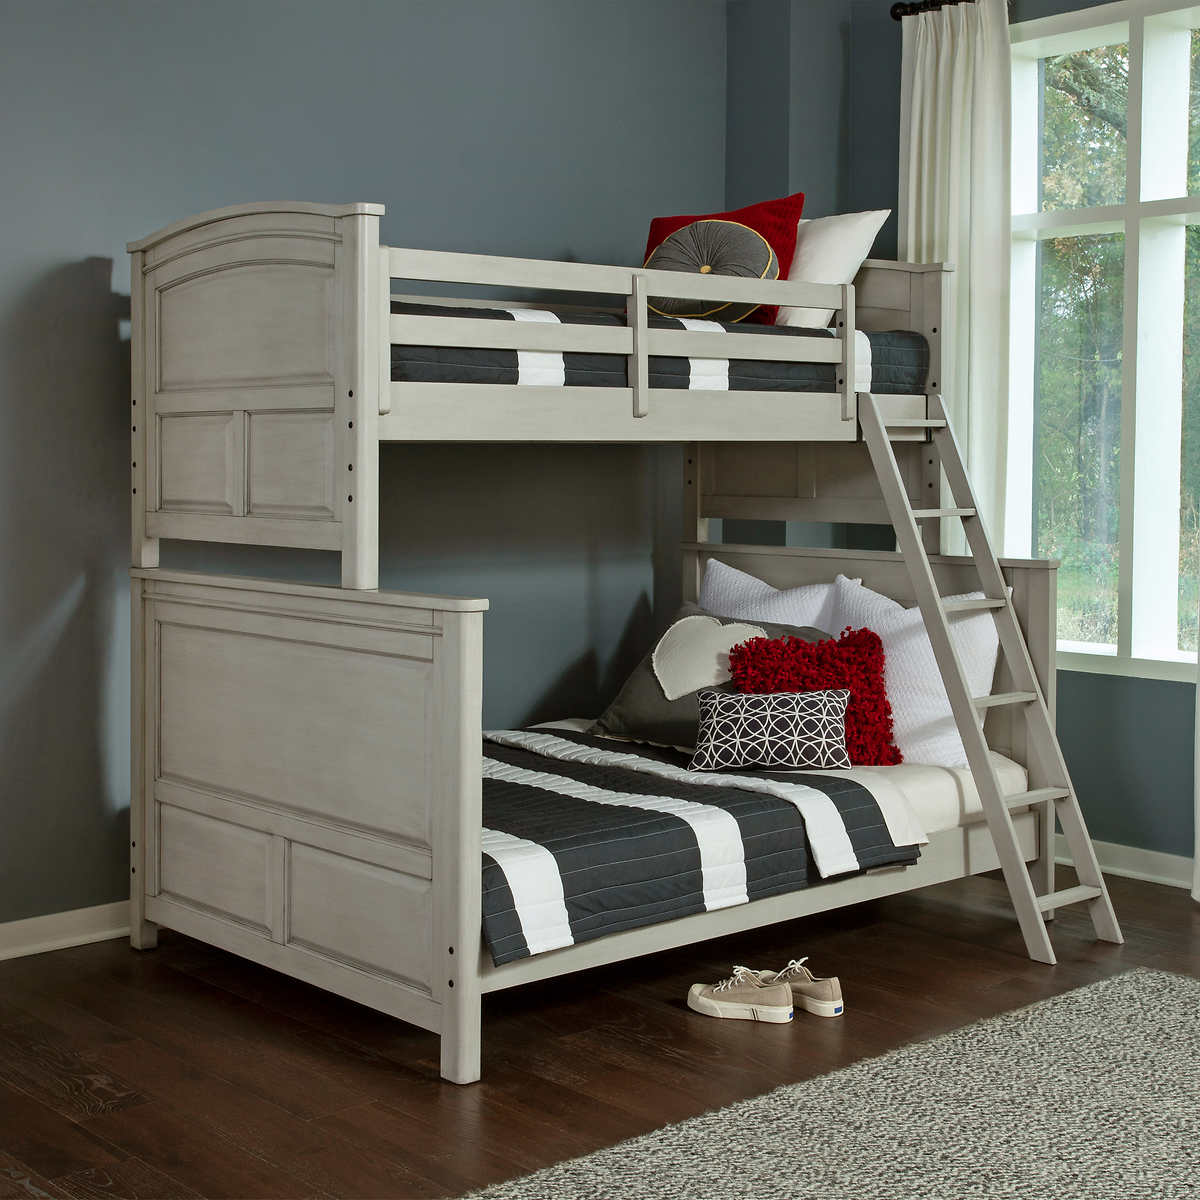 Wingate Twin Over Full Bunk Bed Costco, Xander Gray Twin Full Bunk Bed